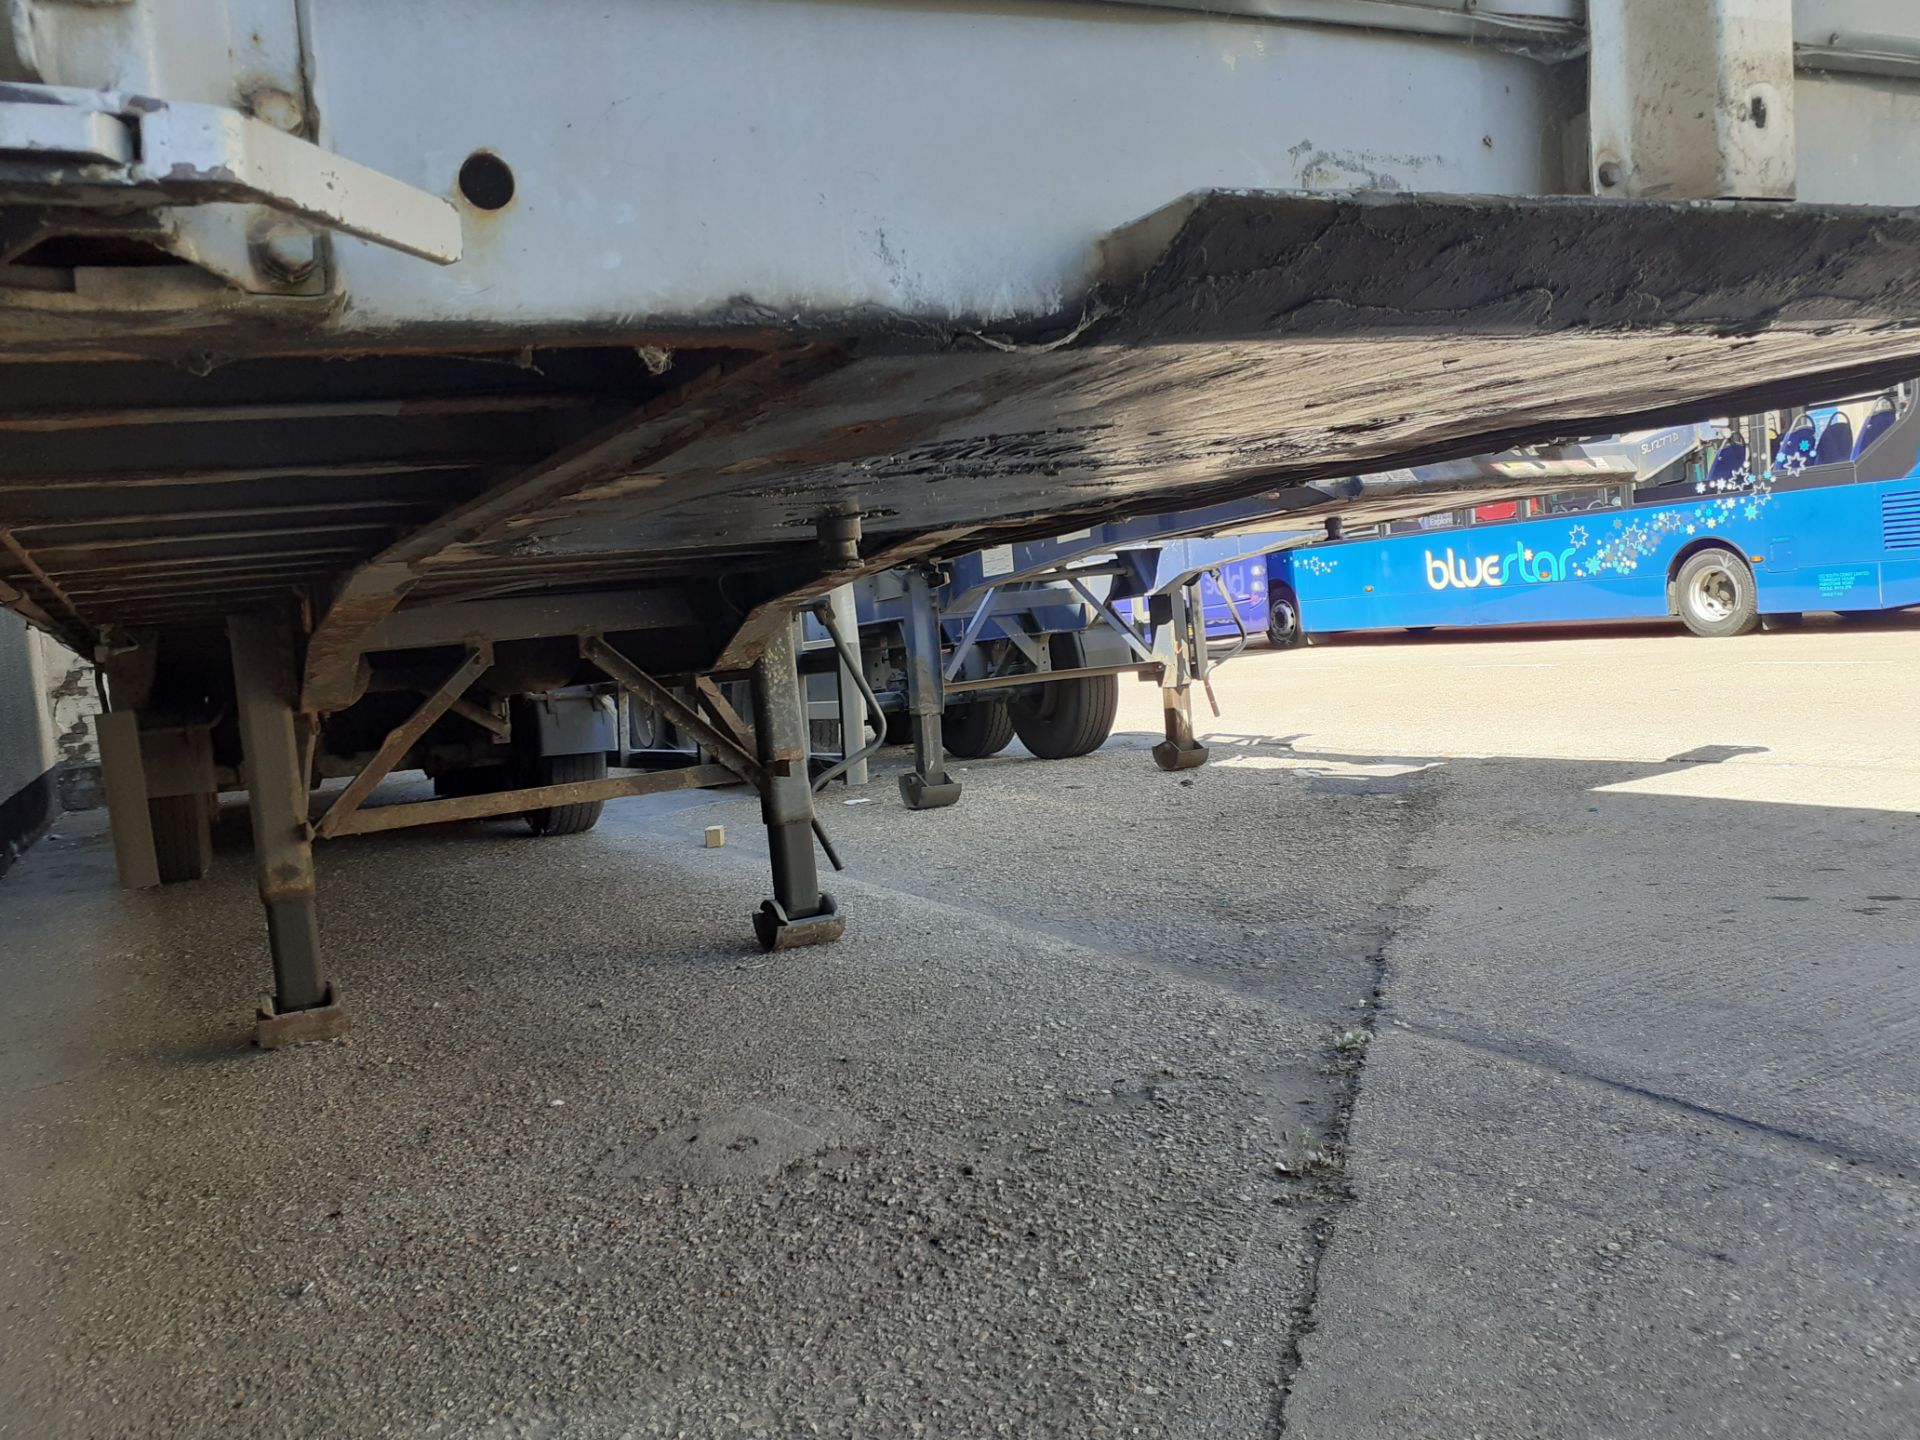 SDC Trailers Tri-Axle Curtain Side Trailer serial number H01100008282 (01/01/05) - Contents included - Image 12 of 20